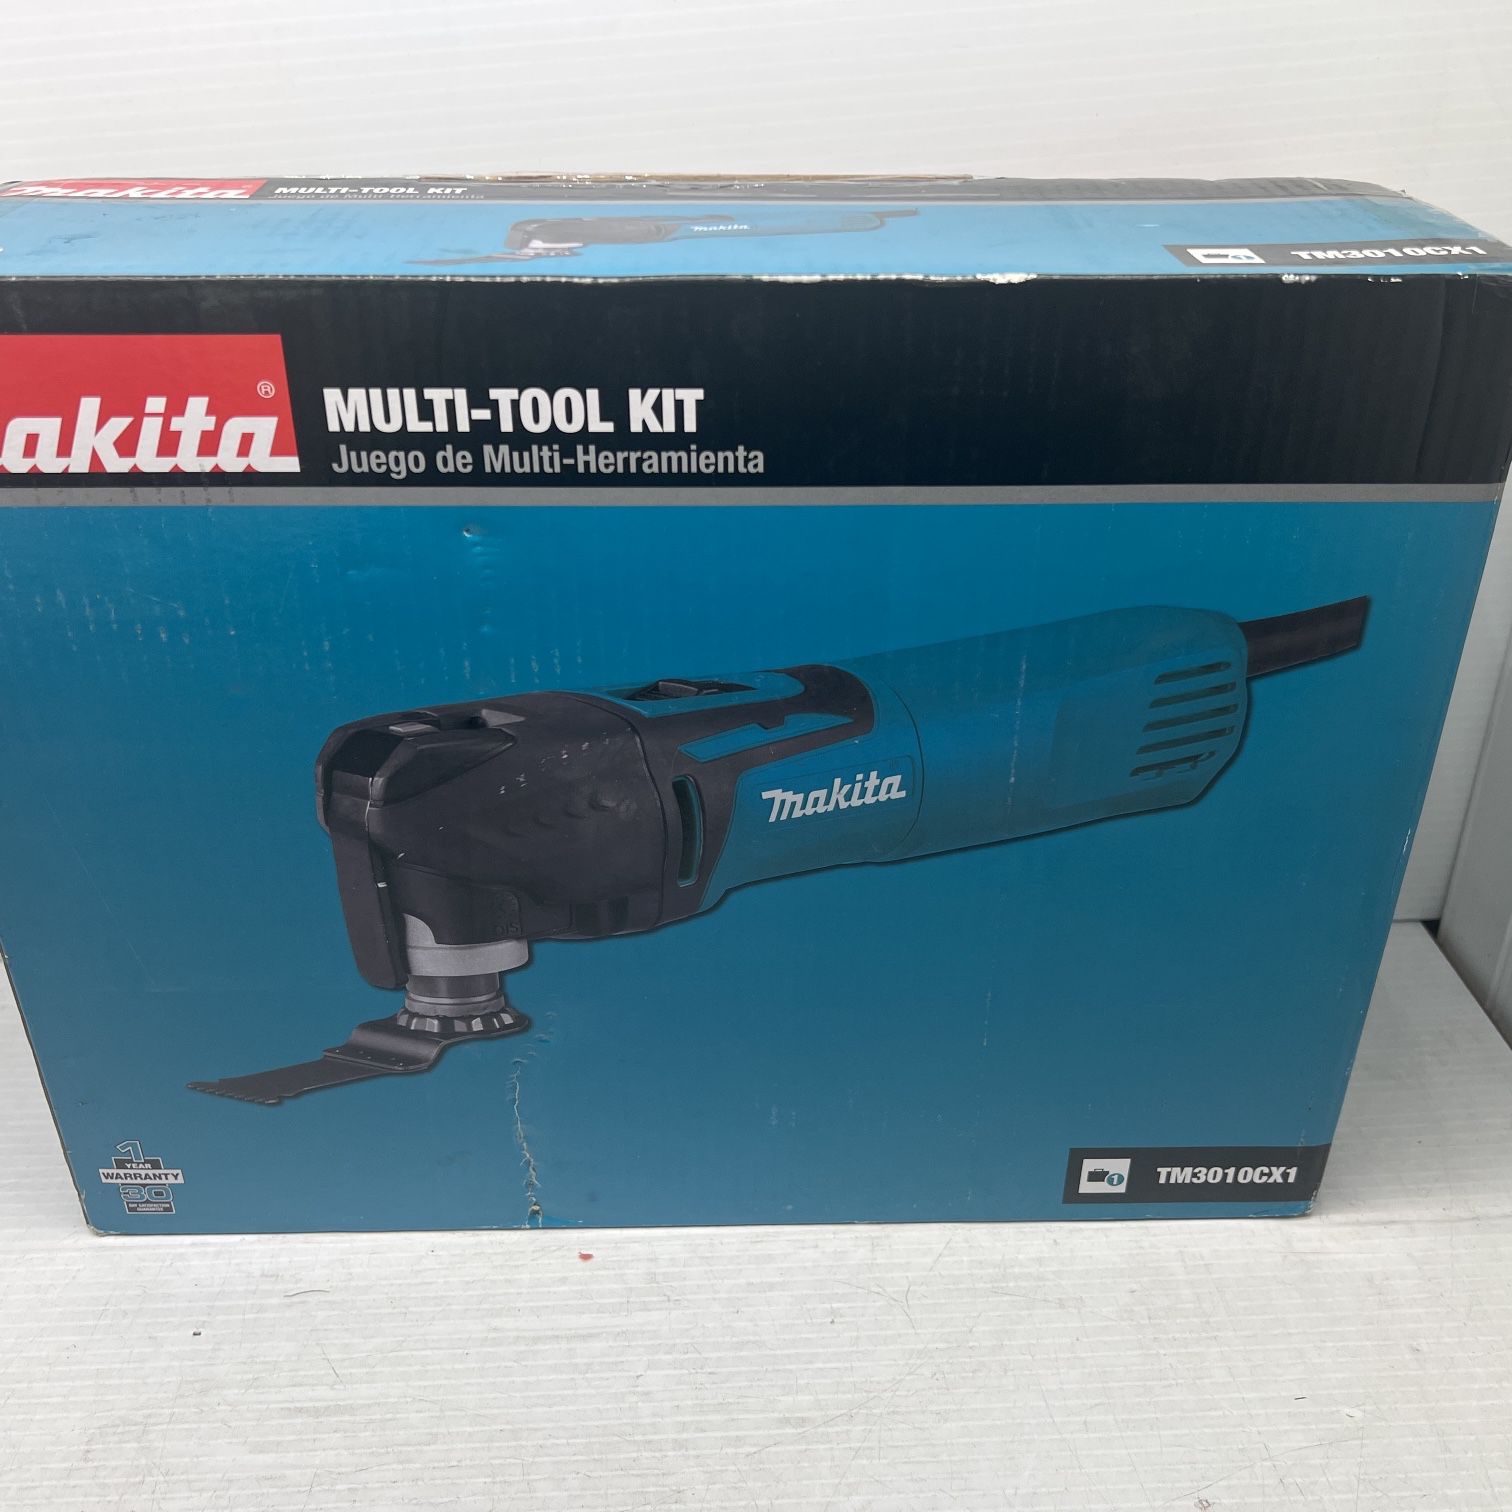 Makita Tm3010cx1 3amp Corded Variable Speed Oscillating Multi Tool Kit for  Sale in Bronx, NY OfferUp